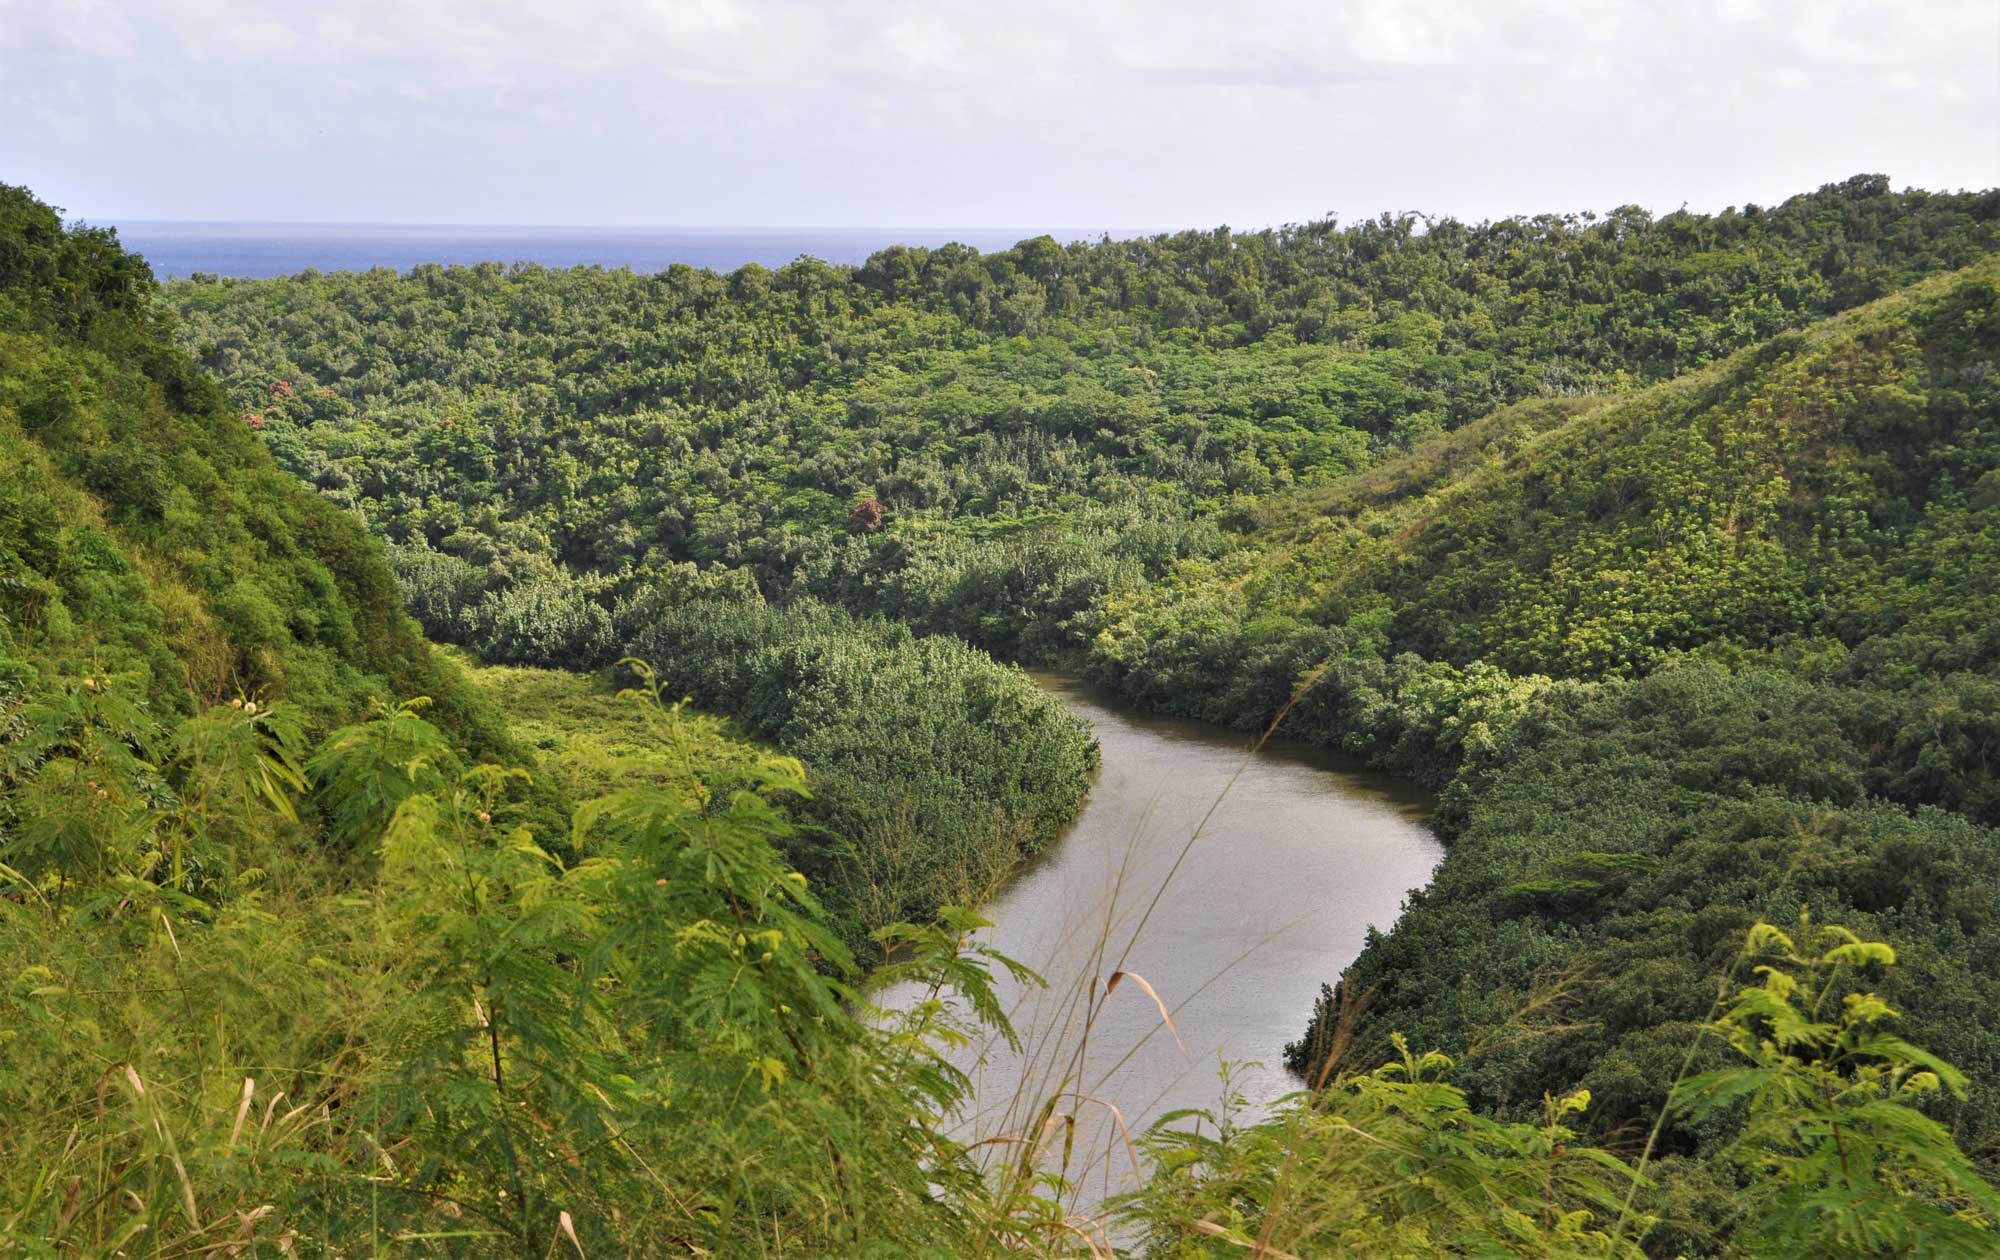 Photograph of Wainiha River on Kaua'i. The photo shows a sinuous river flowing through a green landscape. The land slopes downward toward the river.